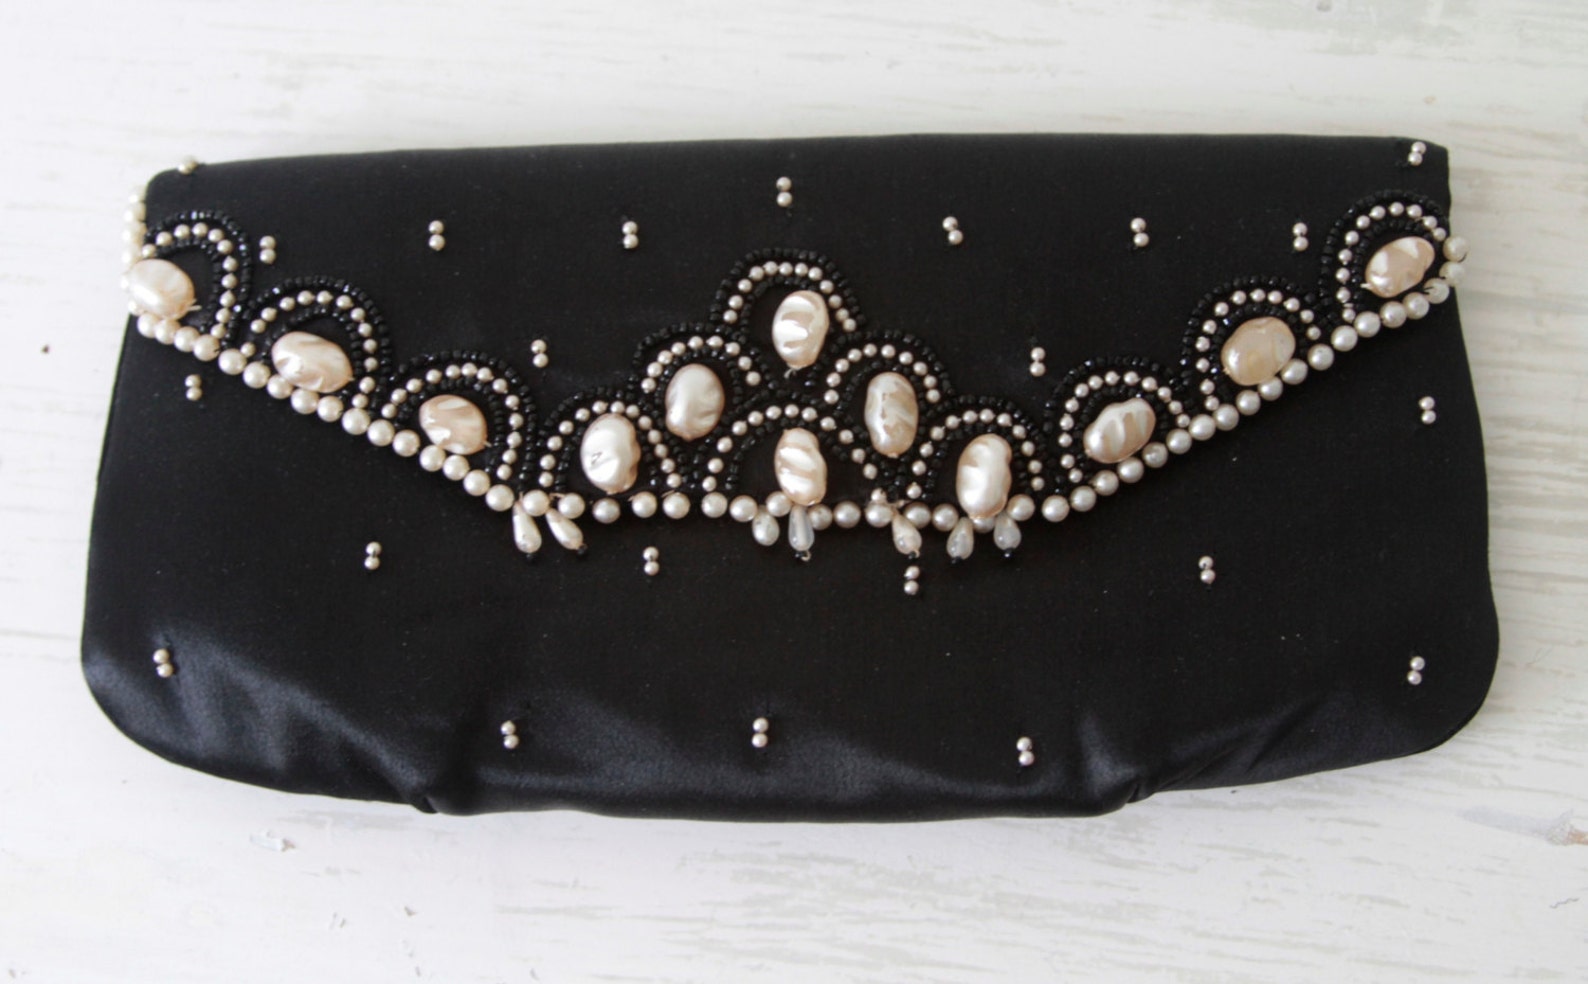 Vintage Magid Black Satin Clutch With Faux Freshwater Pearls - Etsy